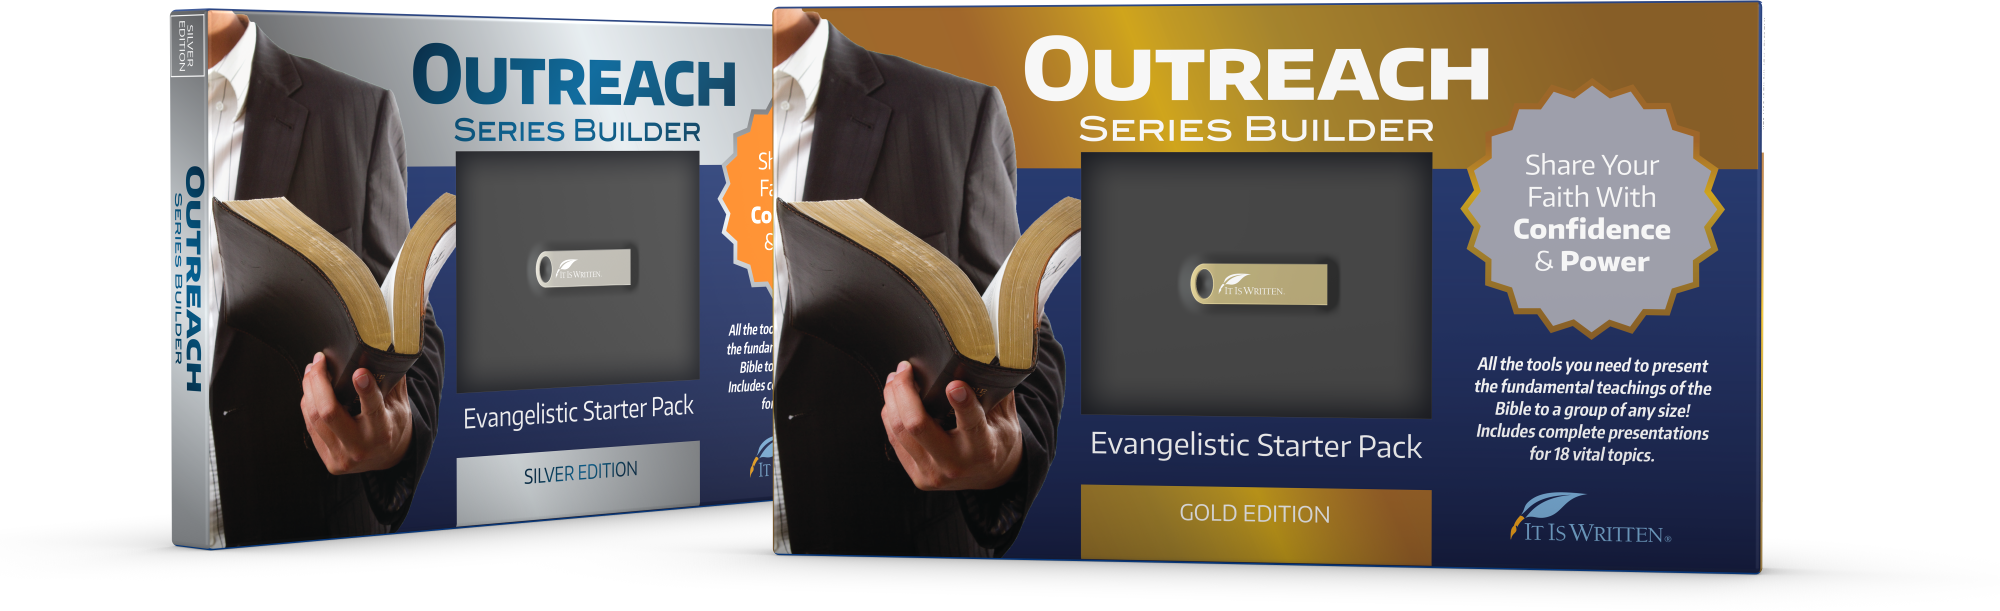 Outreach Series Builder Evangelistic Starter Pack boxes